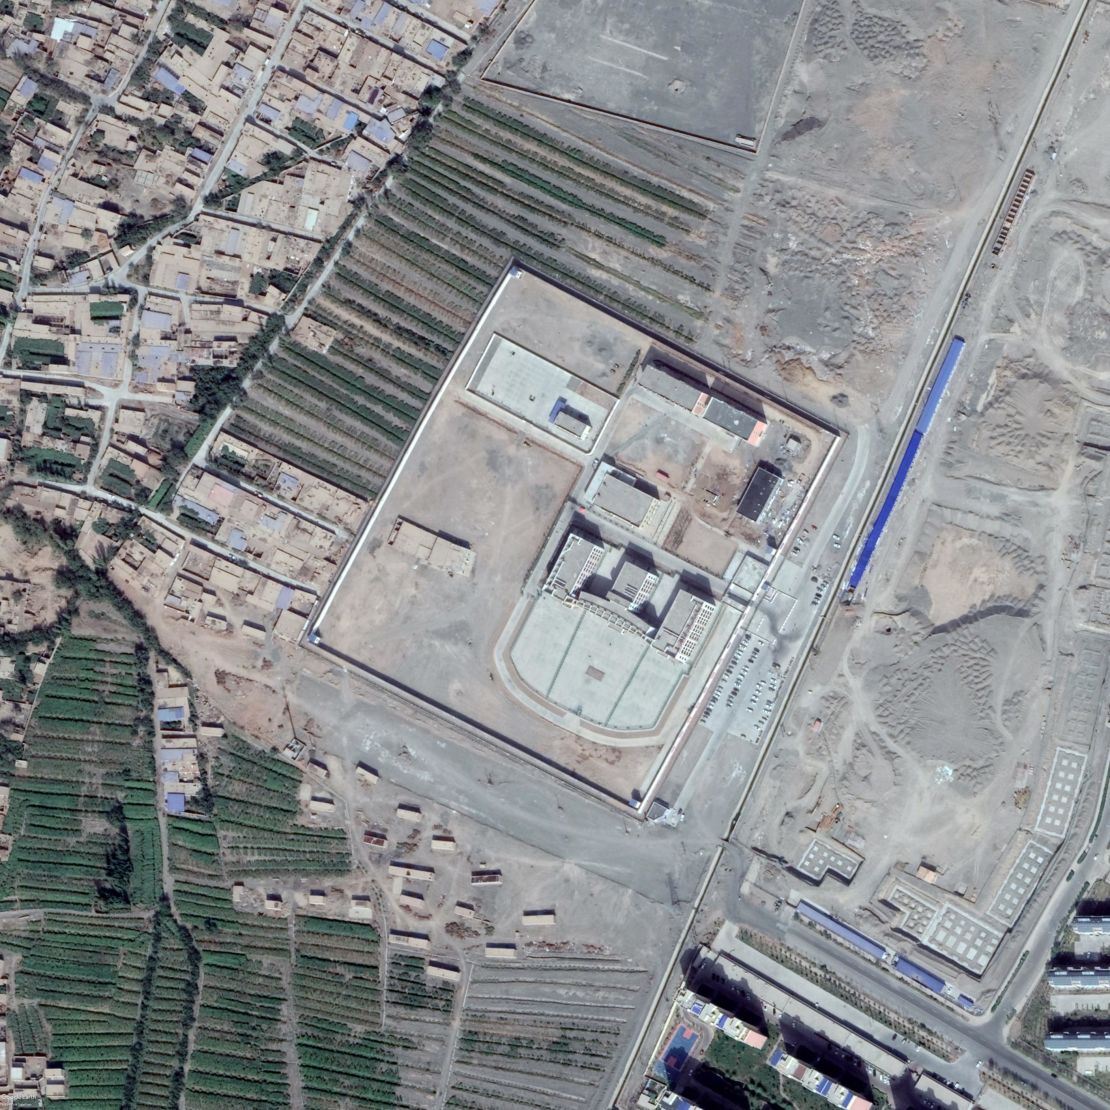 Another alleged detention center outside the town of Turpan, which CNN also found to be inaccessible.